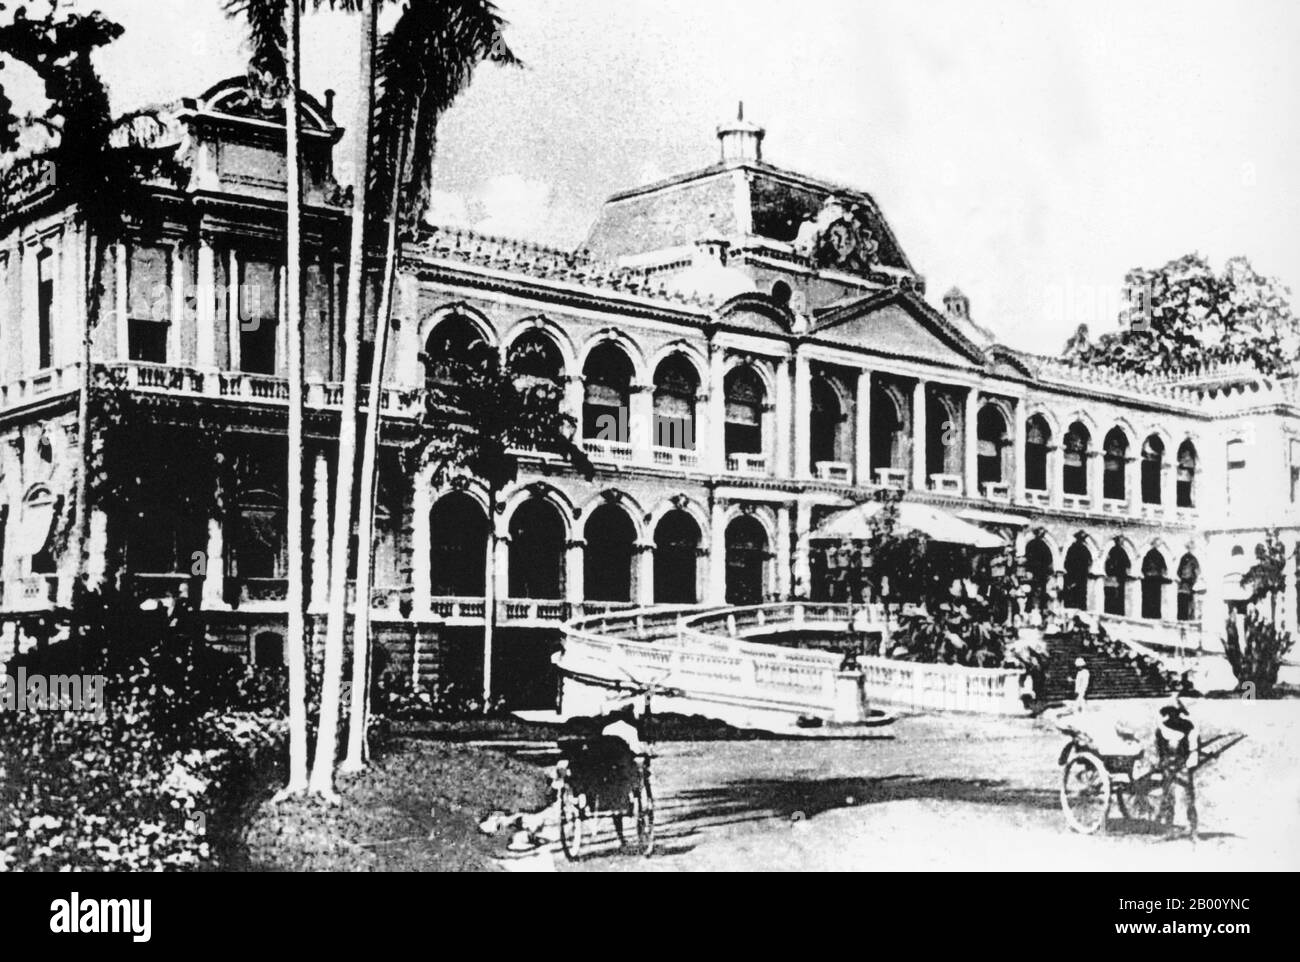 Vietnam: French governor's palace in Saigon, later known as Norodom Palace, destroyed in 1962 (early 20th century).  Originally the French governor's palace, then Norodom Palace, then  Independence Palace, the magnificent original French building was knocked down to make way for Reunification Palace, which was built on the same site between 1962 -66. It is today a famous landmark in Ho Chi Minh City and a popular museum and tourist attraction. The present building was designed by architect Ngo Viet Thu and was the home and workplace of the President of South Vietnam during the US-Vietnam War. Stock Photo